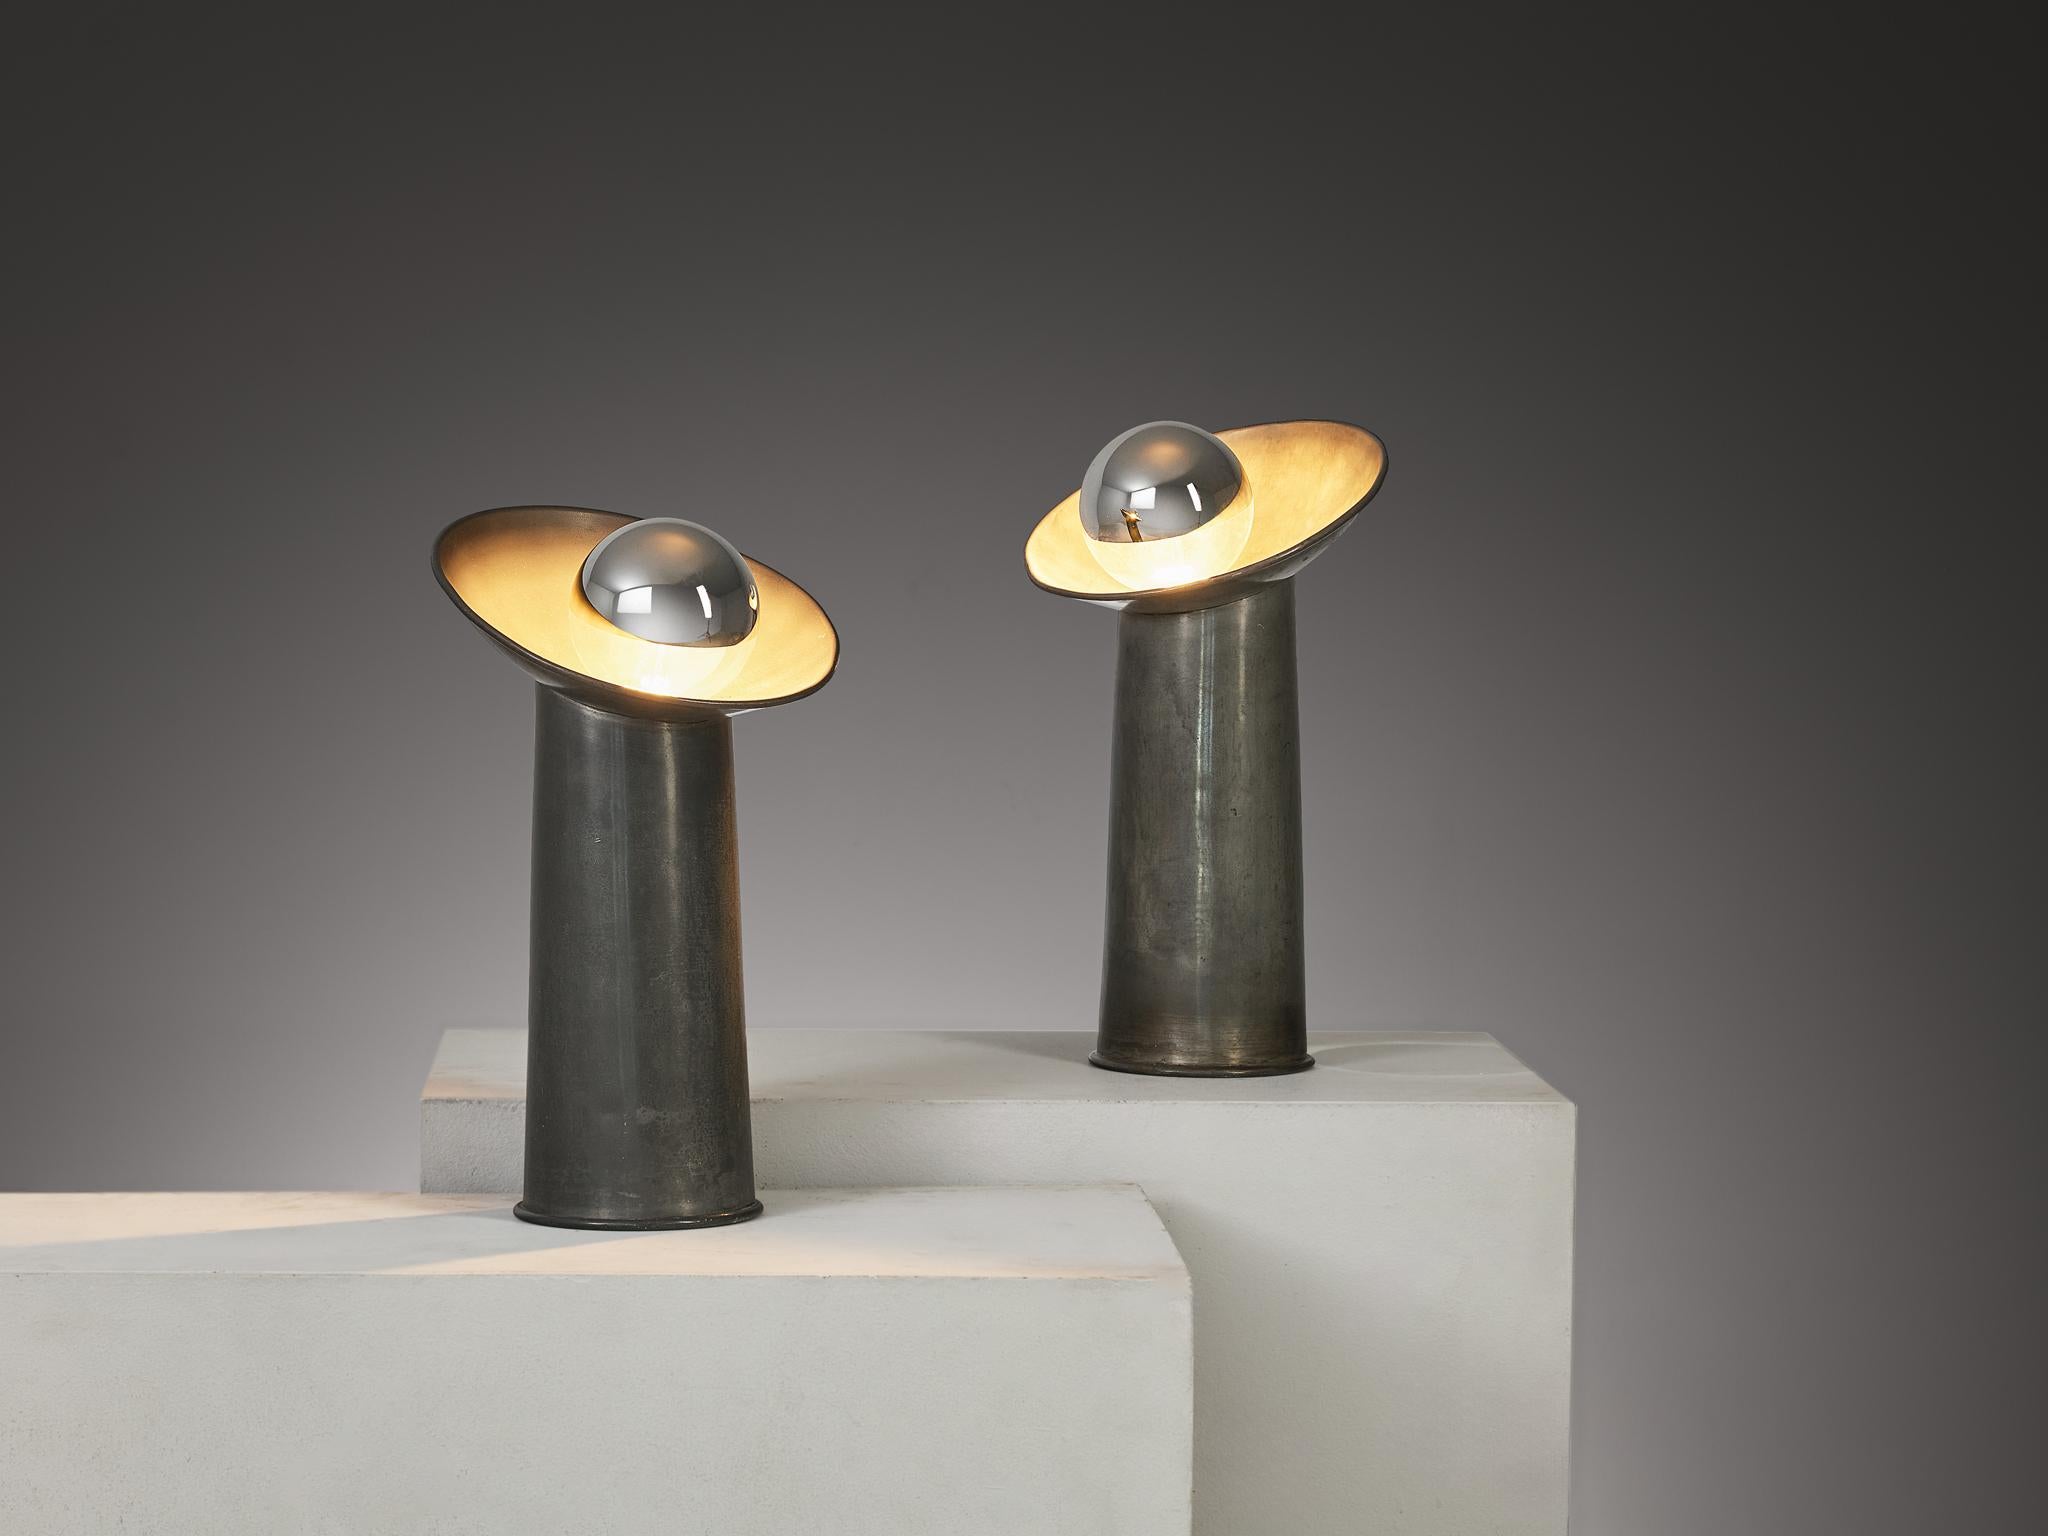 Gjlla Giani for the Nucleo Division of Sormani, 'Radar' table lamps, pewter and glass, Italy, 1971

These rare table lamps are designed by the Italian architect Gjlla Giani for the Nucleo Division of Sormani. The lamp embodies a uniform design;